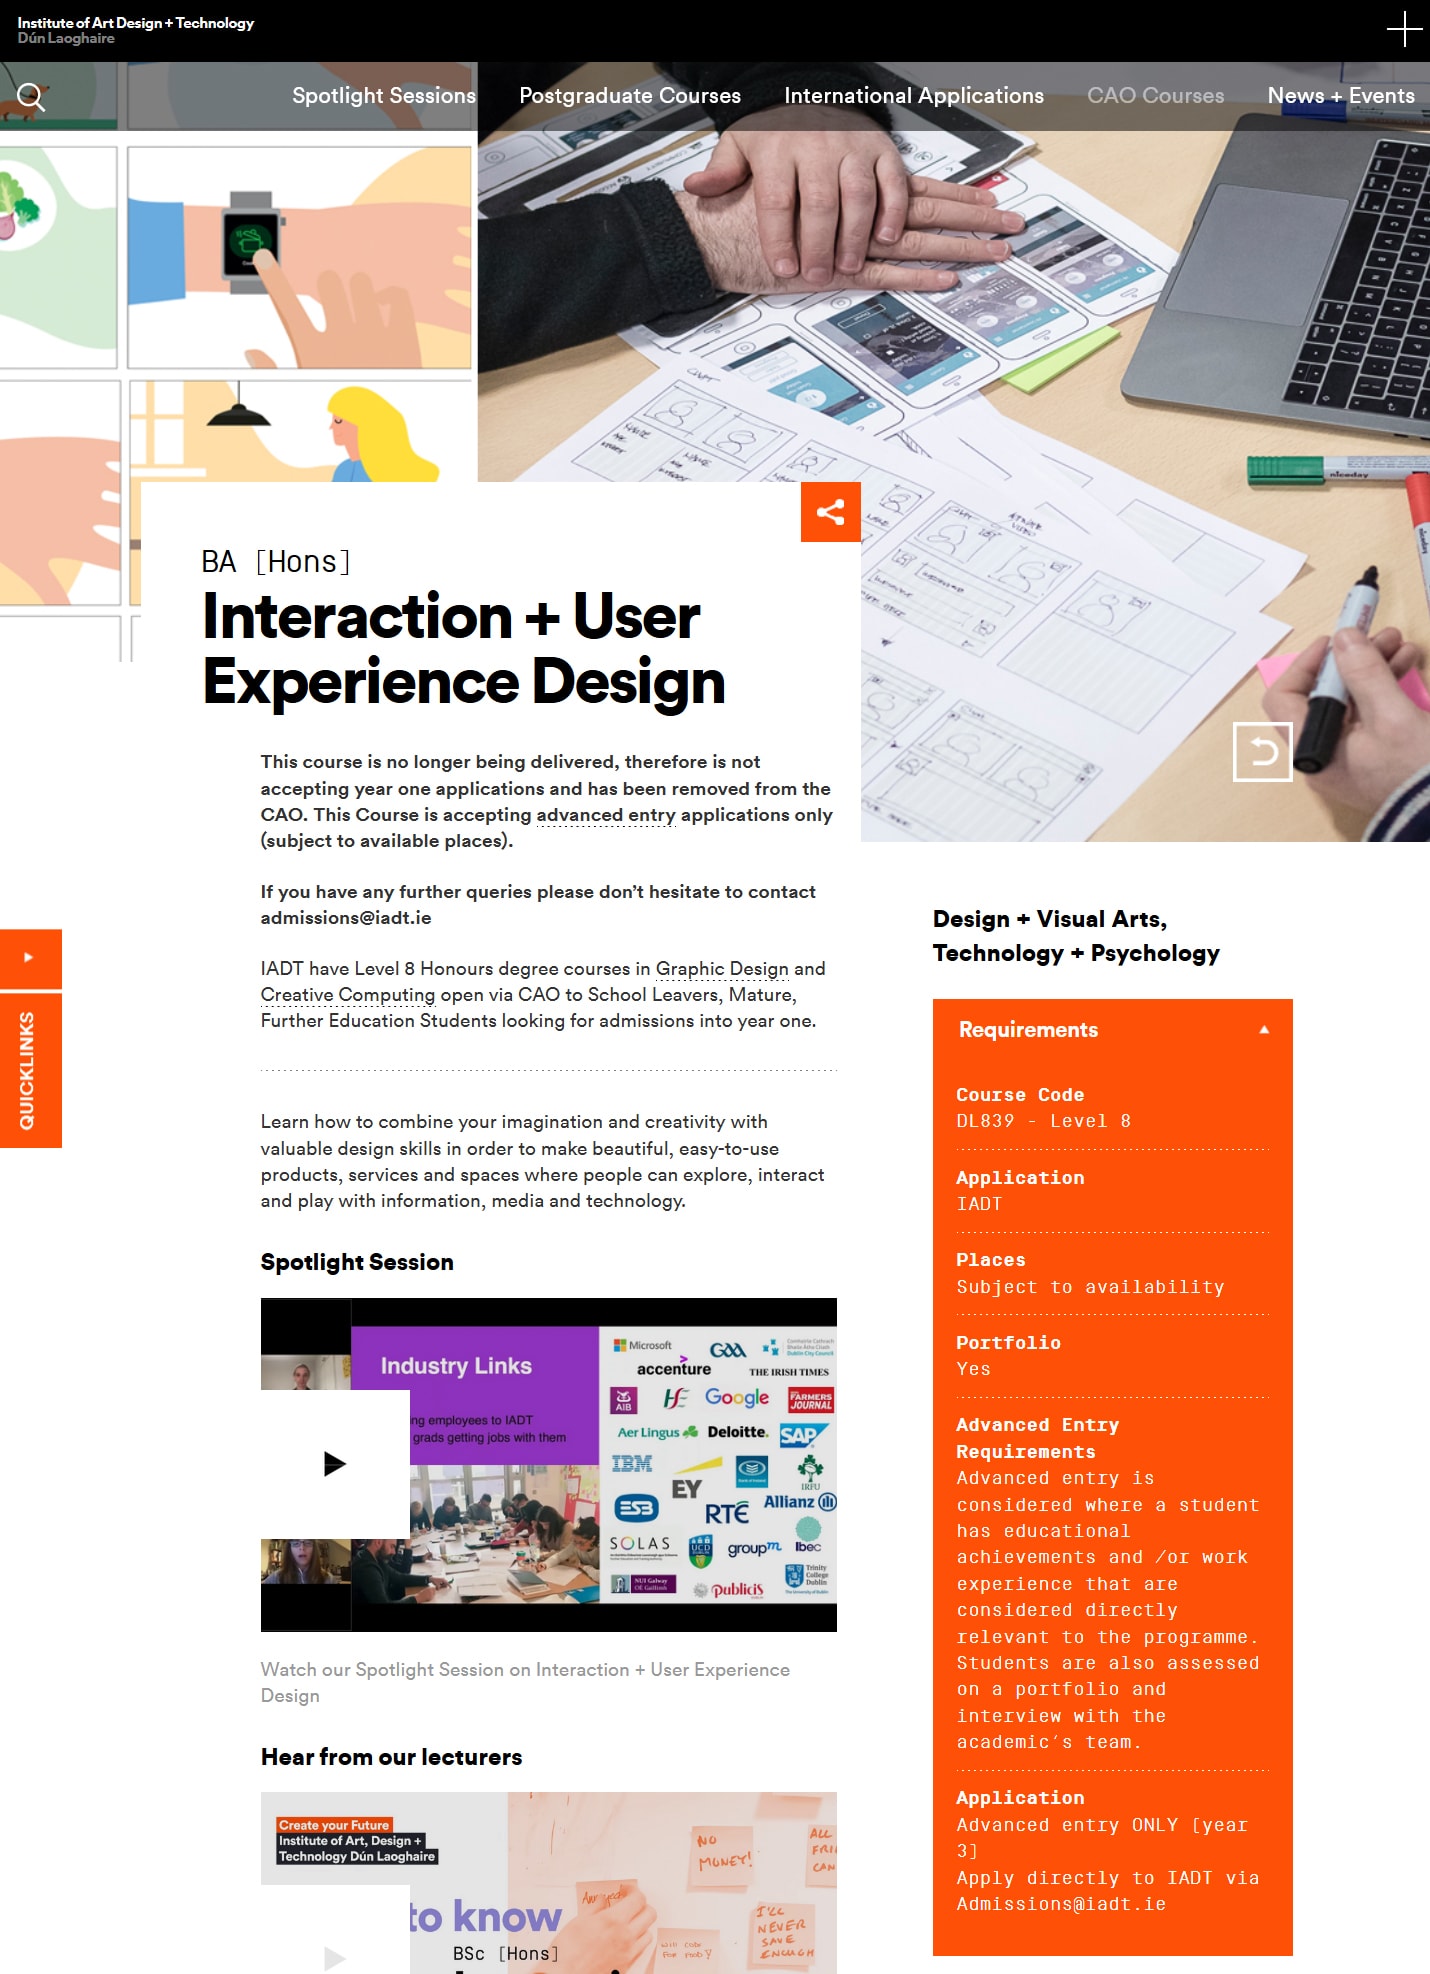 Interaction user experience design course at IADT